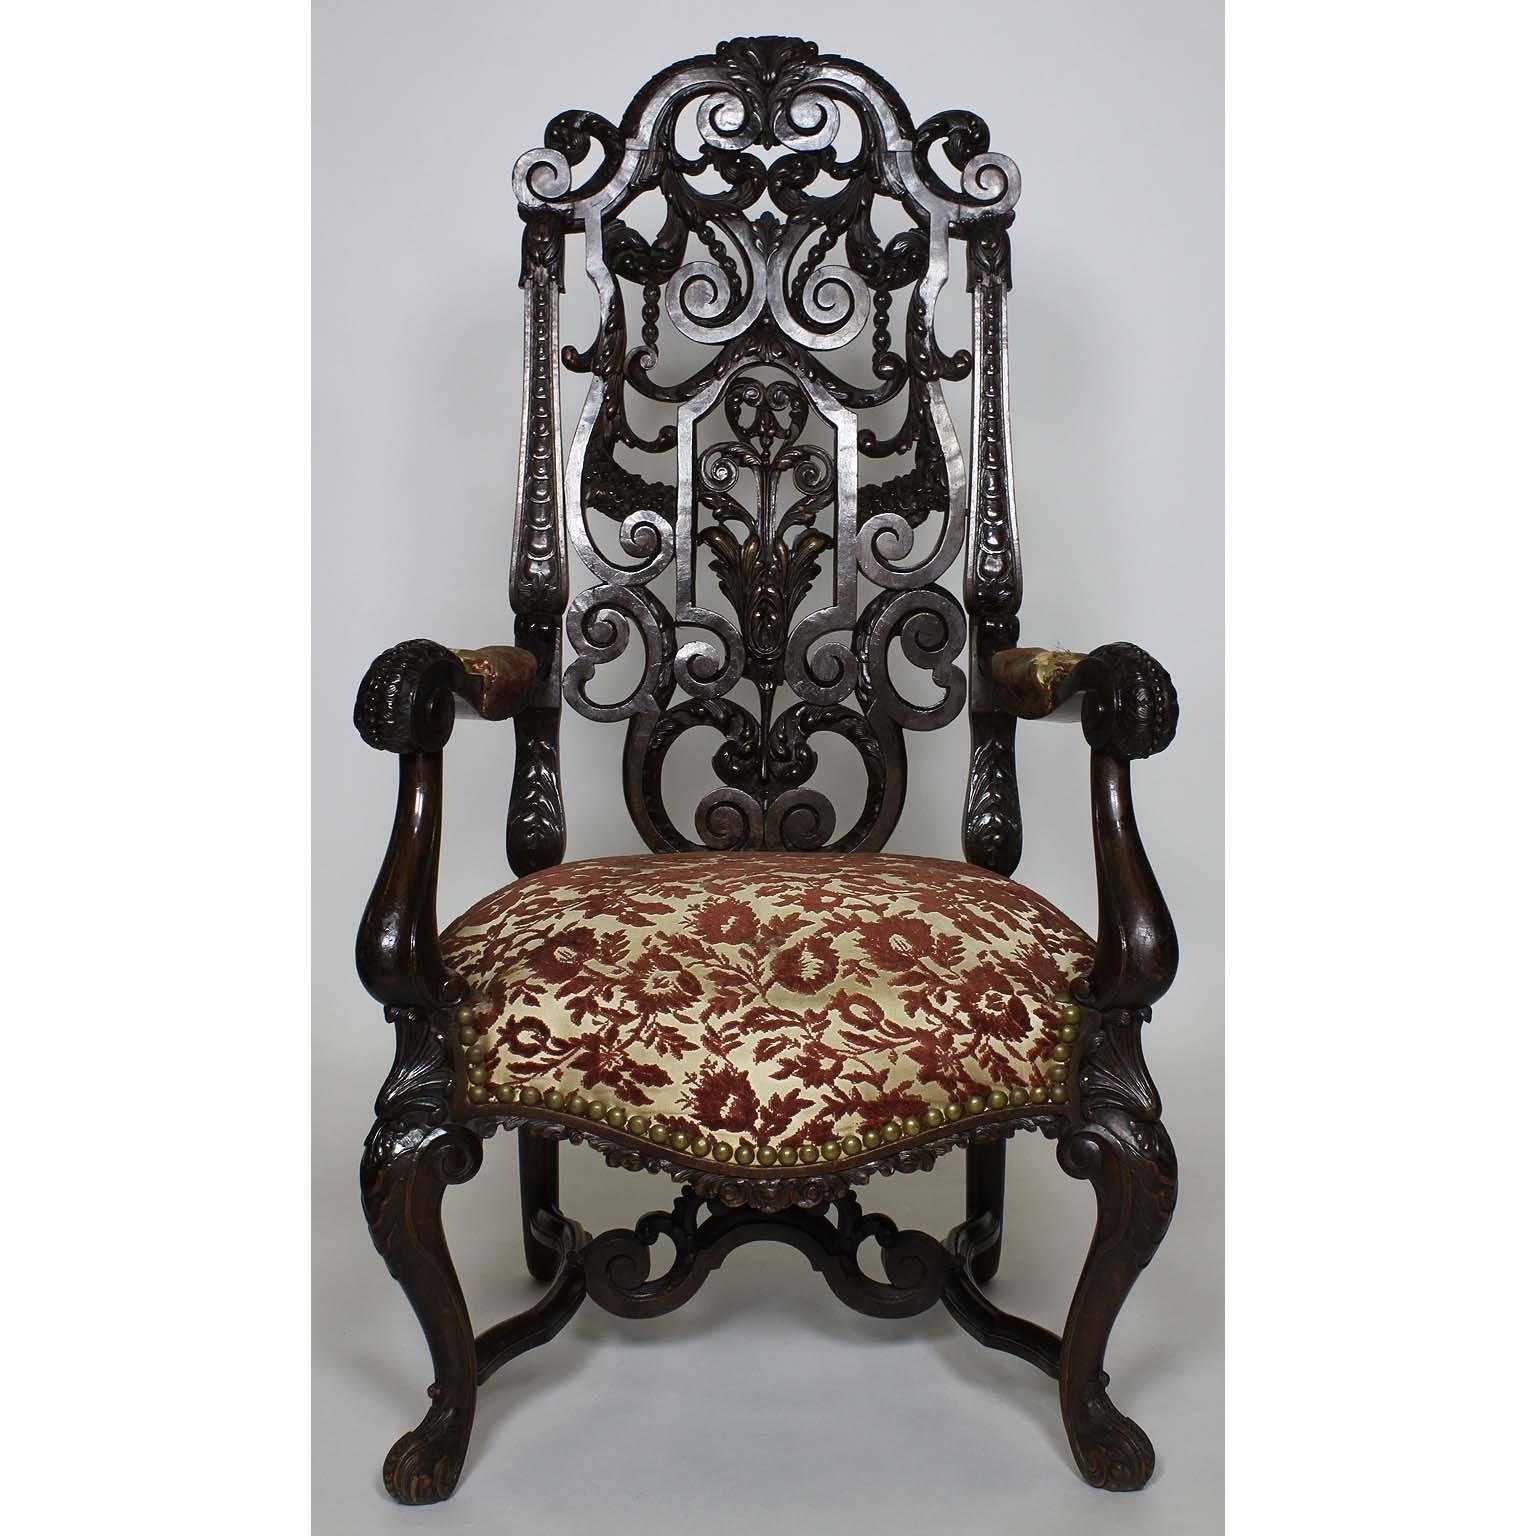 Baroque Revival An Anglo-Dutch 19th Century Walnut Carved 5 Piece Parlor Set, After Daniel Marot For Sale